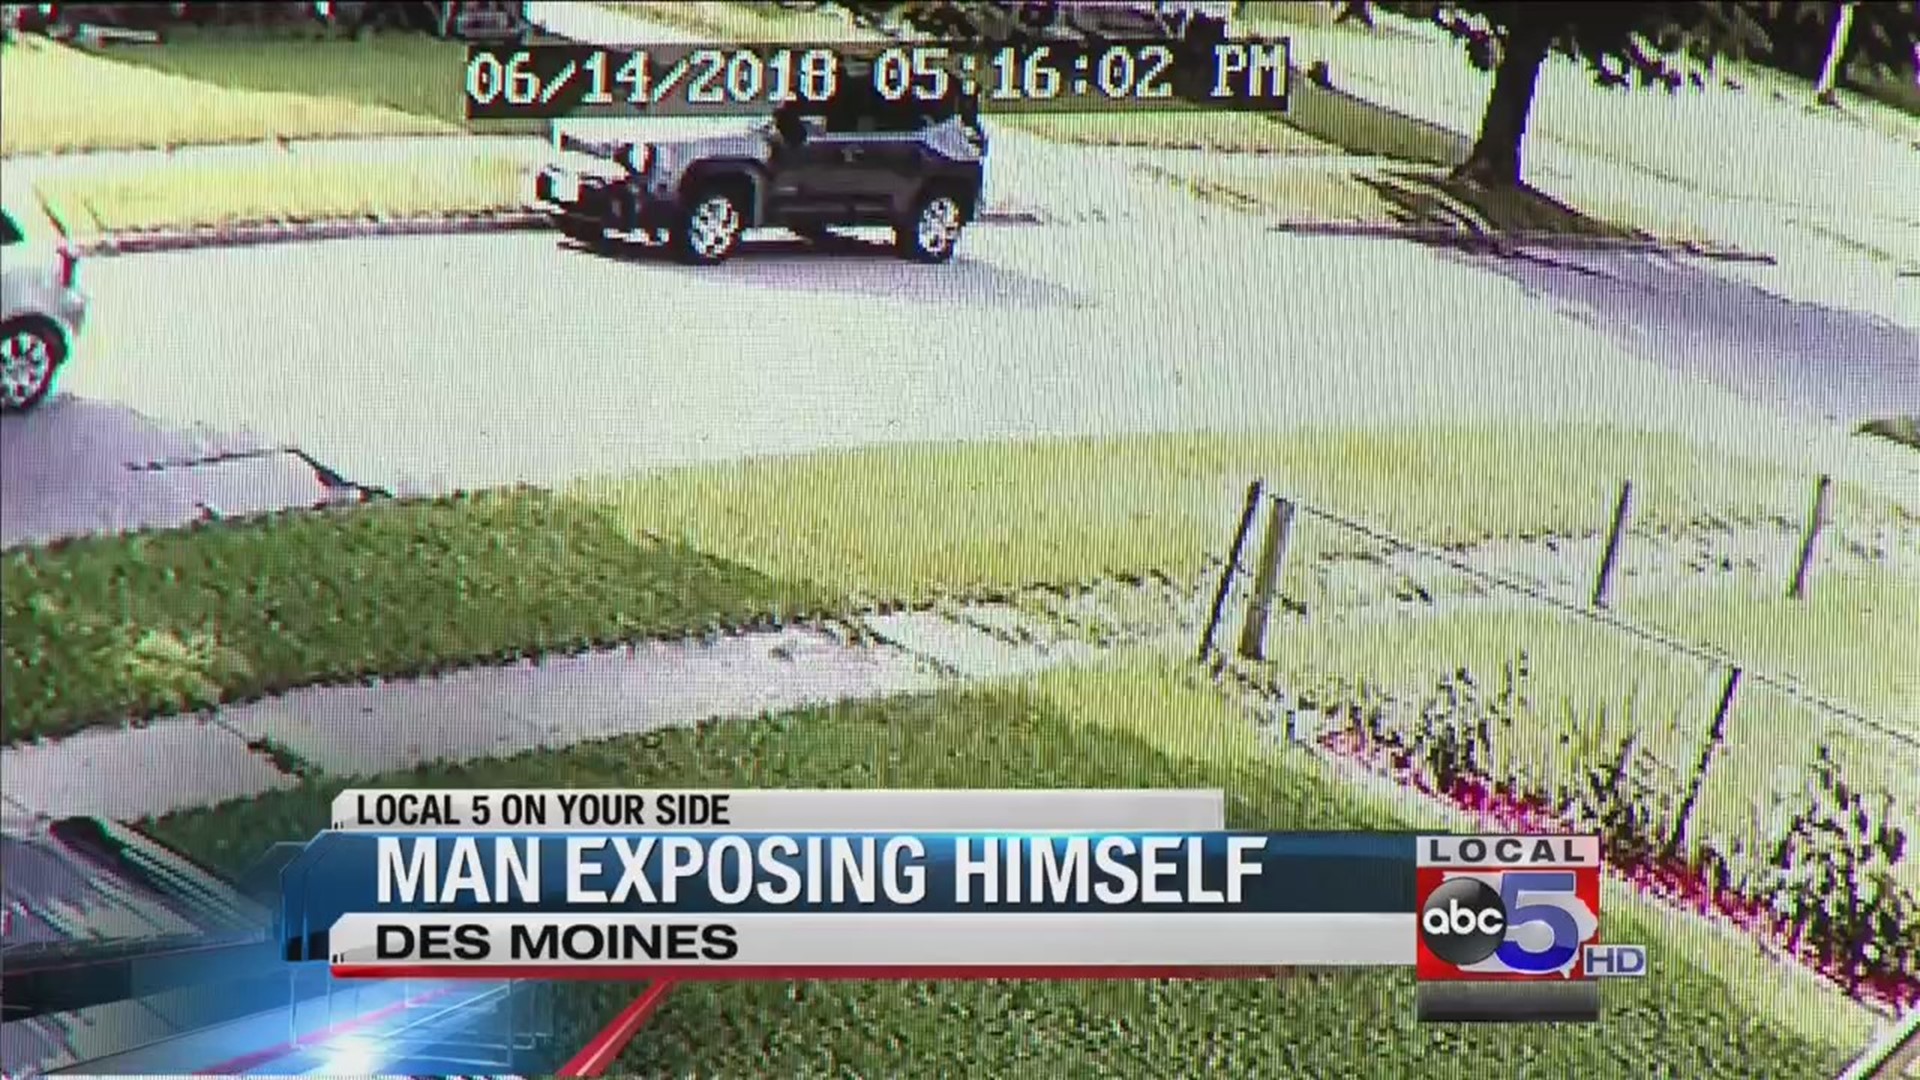 What are police doing to find a man exposing himself to kids?